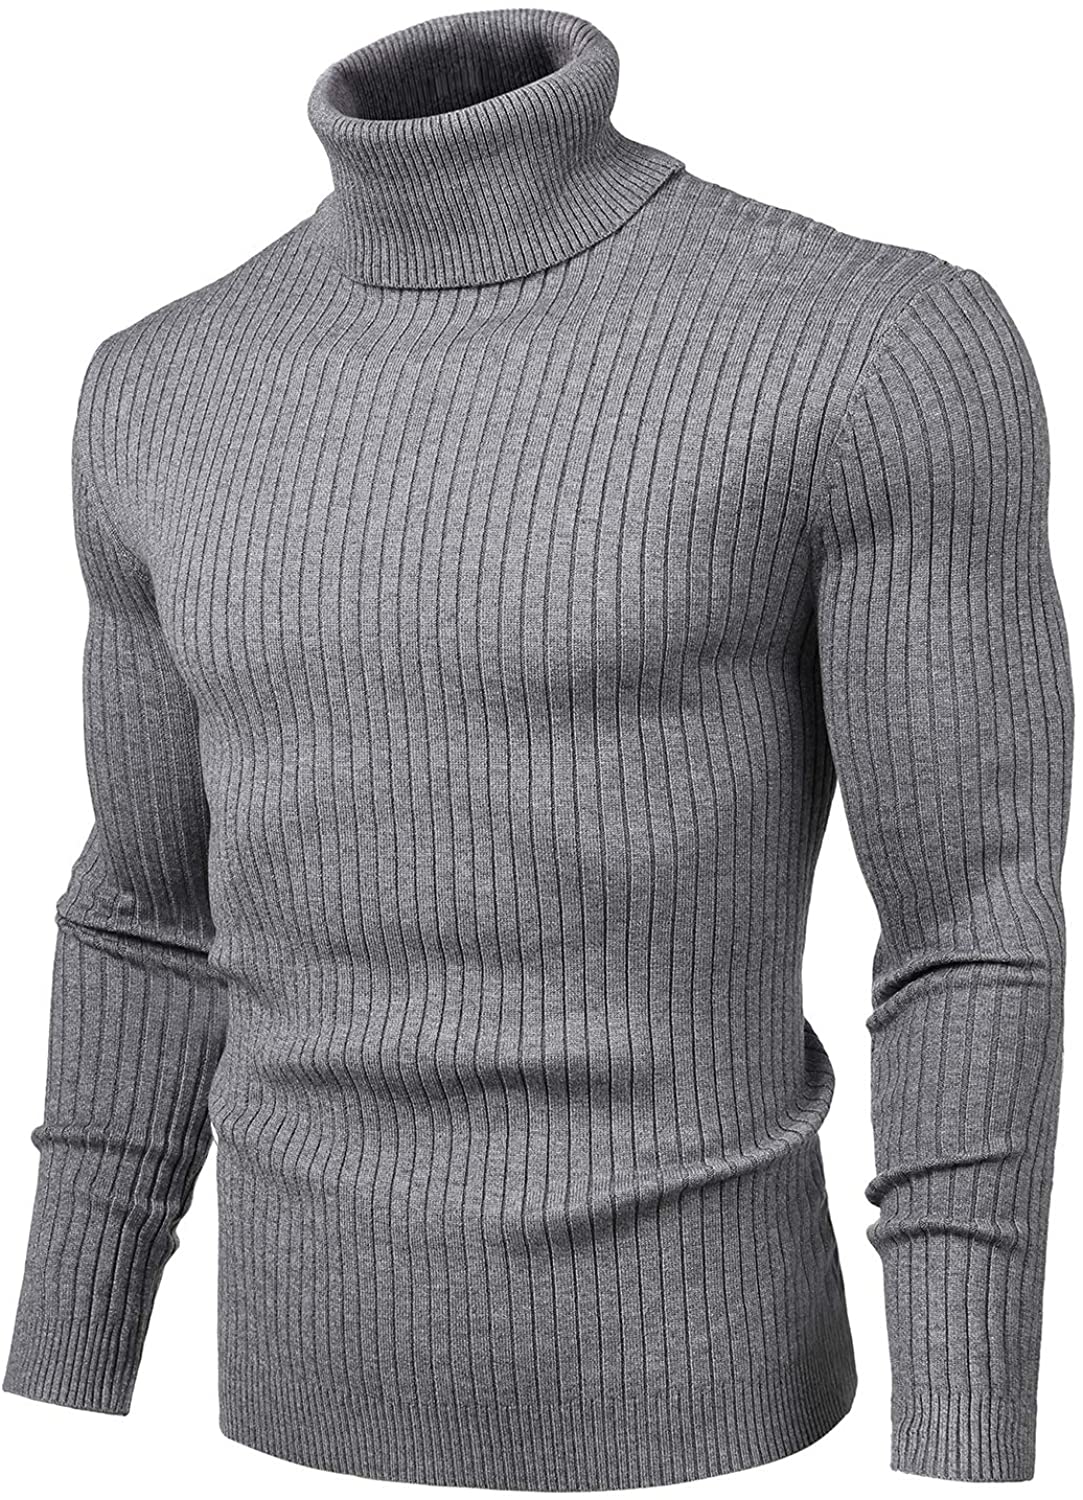 ZXFHZS Mens Basic Ribbed Slim Knitted Pullover Turtleneck Thermal Sweater